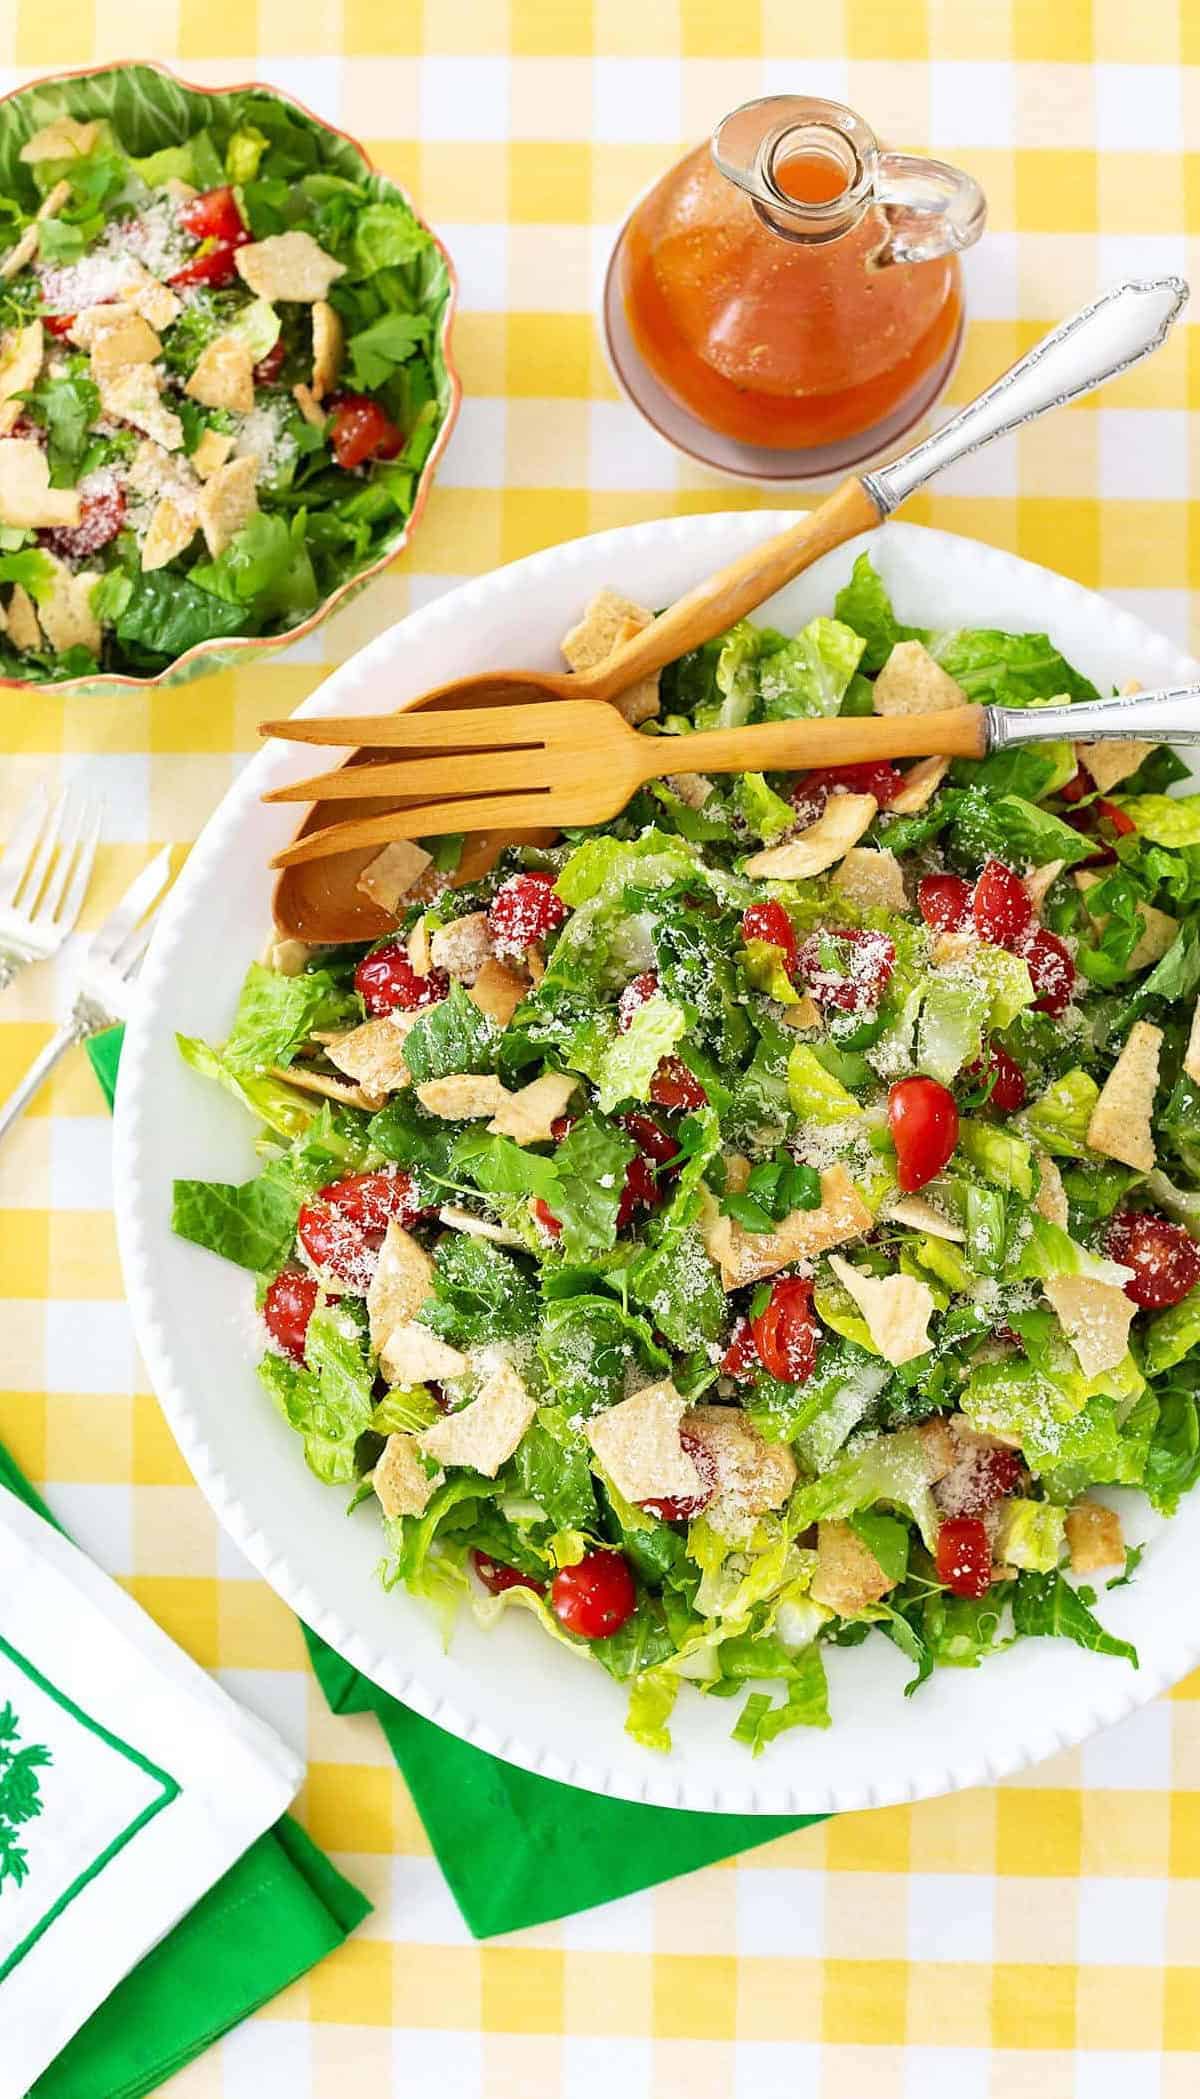  Serving salad is not complete without a tasty dressing like this Green Jacket Salad Dressing.